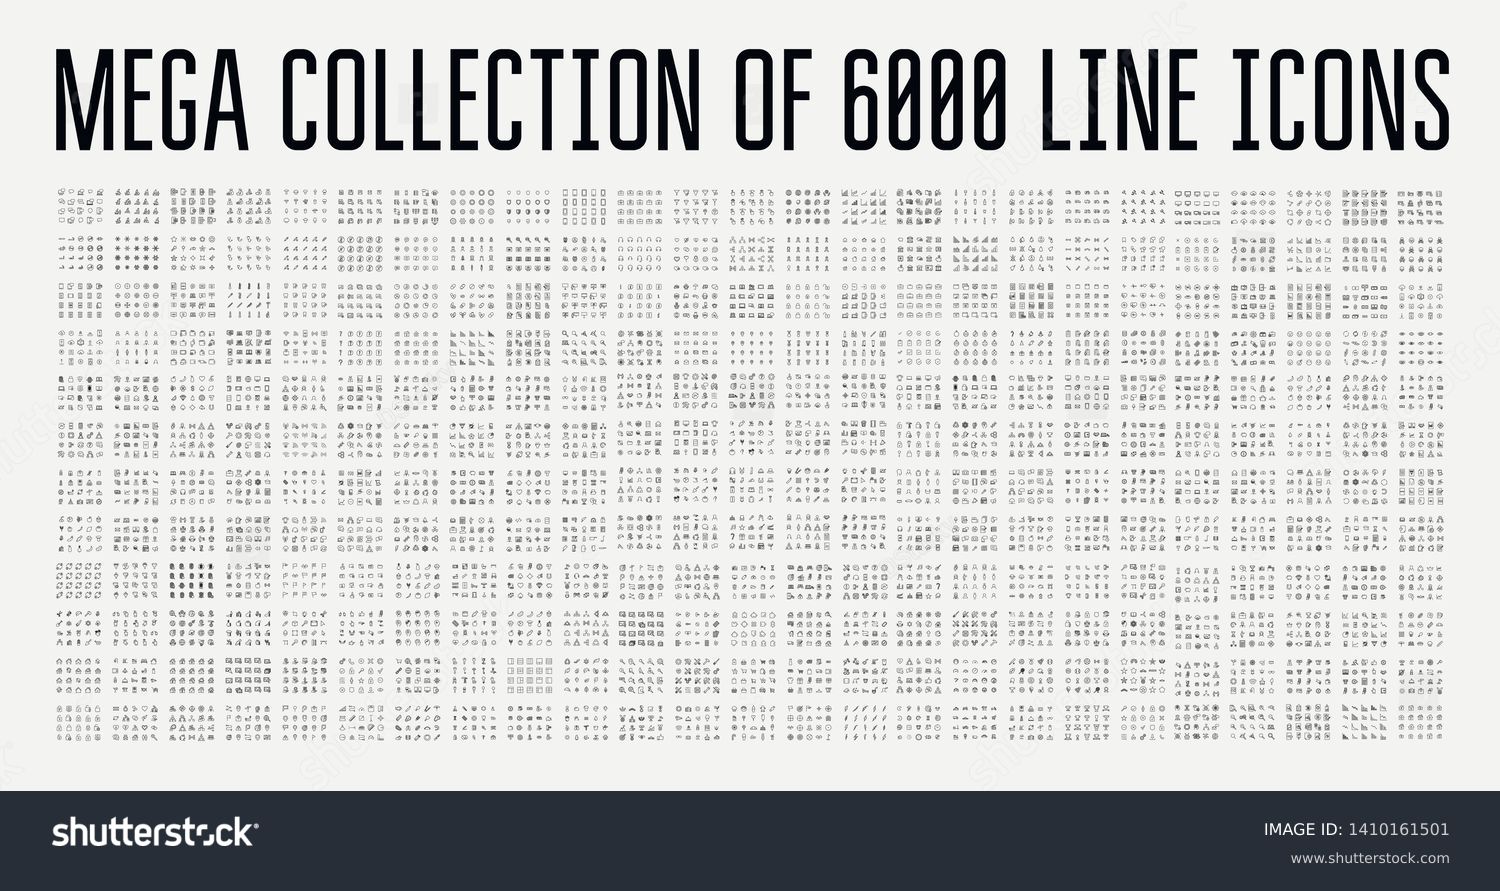 Set of 6000 modern thin line icons. Outline isolated signs for mobile and web. High quality pictograms. Linear icons set of business, medical, UI and UX, media, money, travel, etc. #1410161501